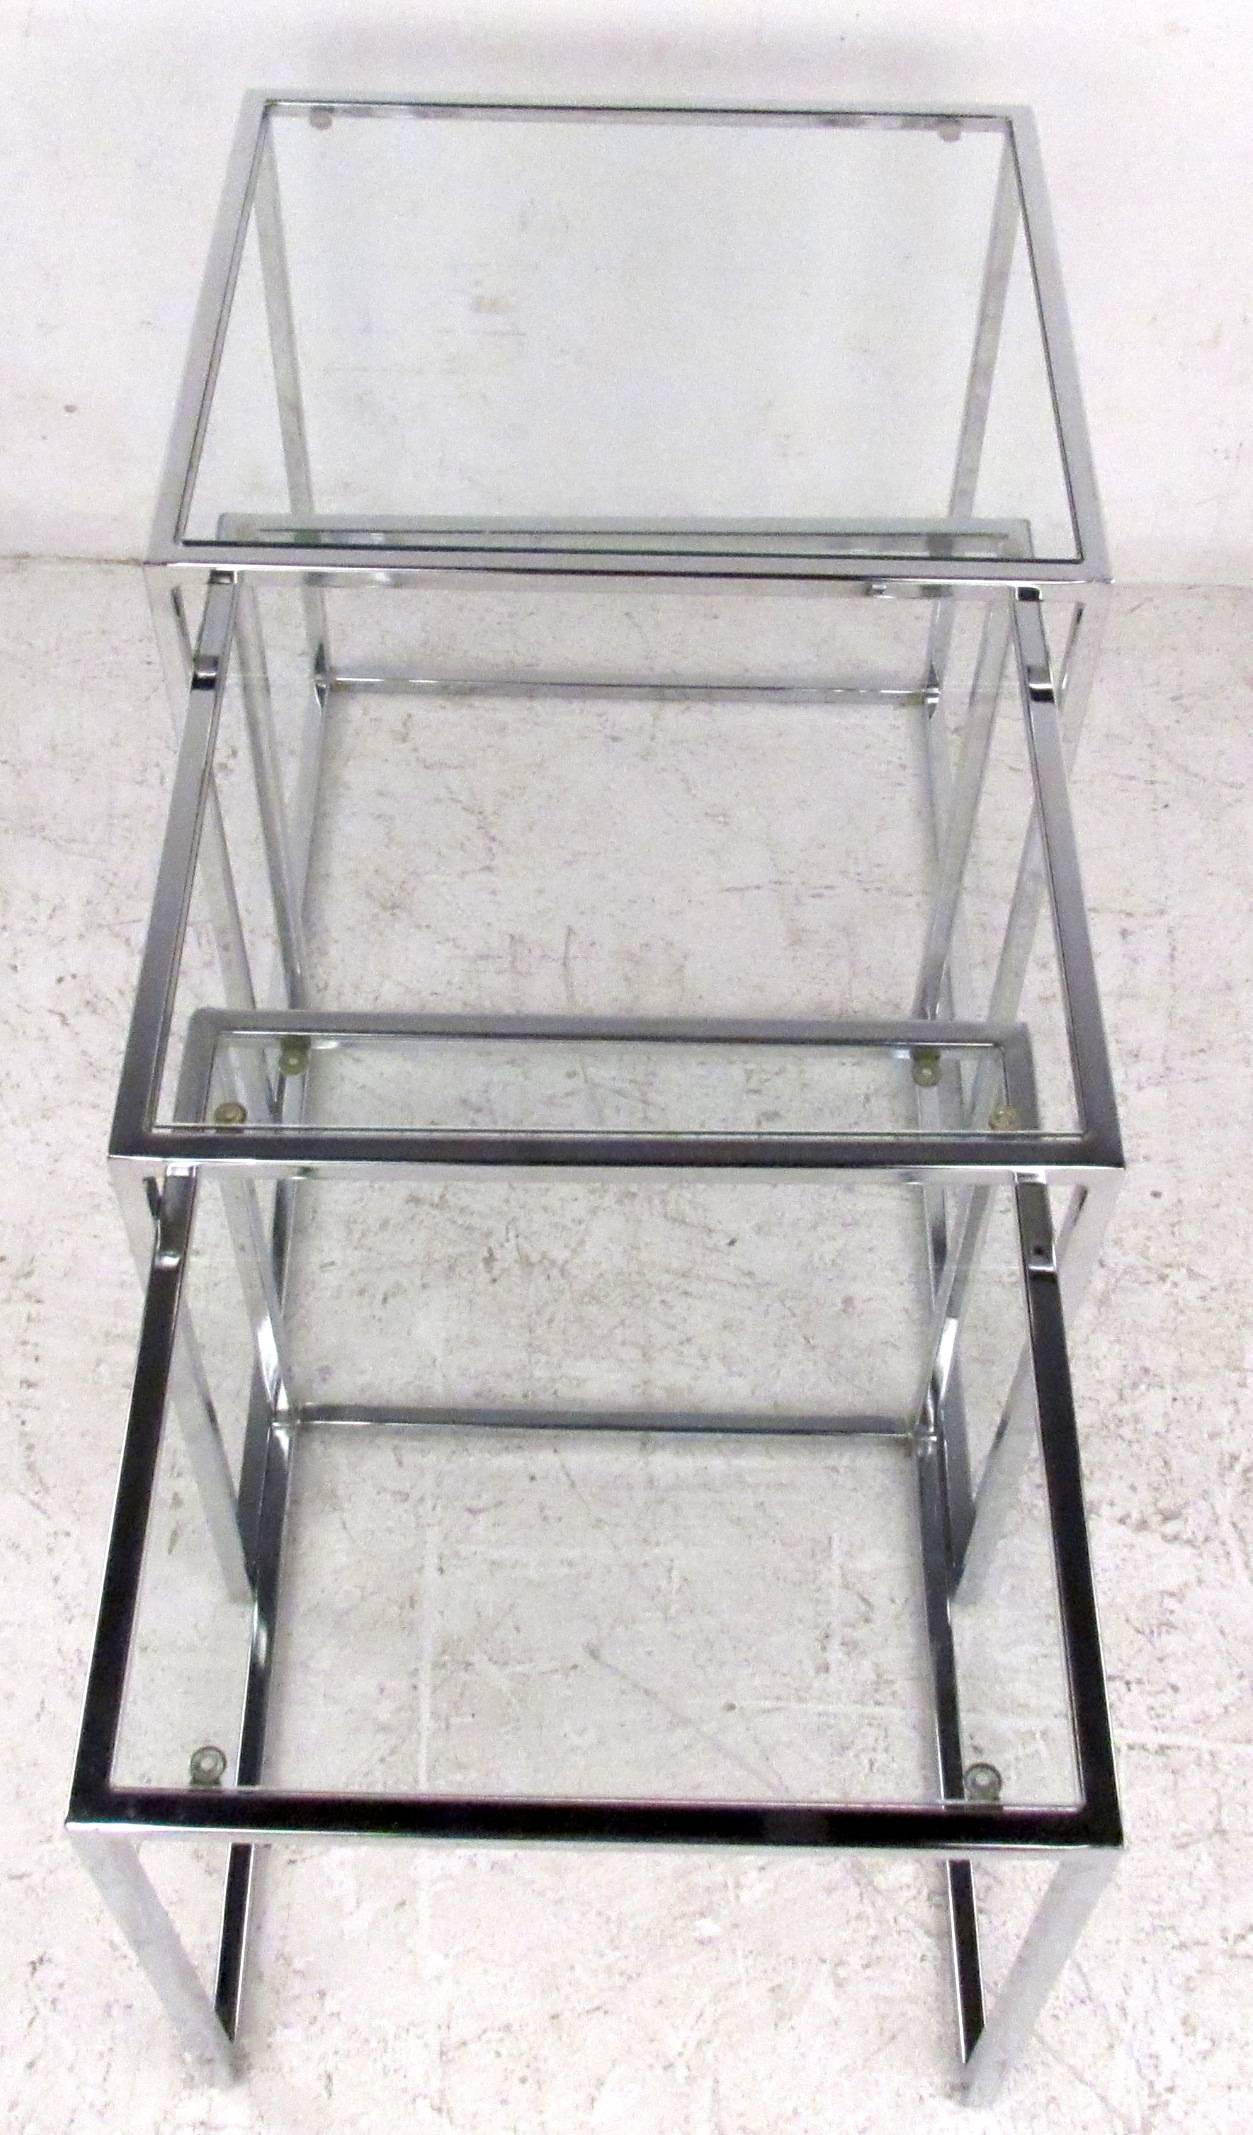 Vintage-modern nesting tables featuring chrome frames with glass tops, designed in the manner of Milo Baughman.

Dimensions: 17.75 W 19.75 D 20.25 H.
 16.75 W 17.75 D 18.75 H.
 15.75 W 16 D 16.75 H.

Please confirm item location NY or NJ with